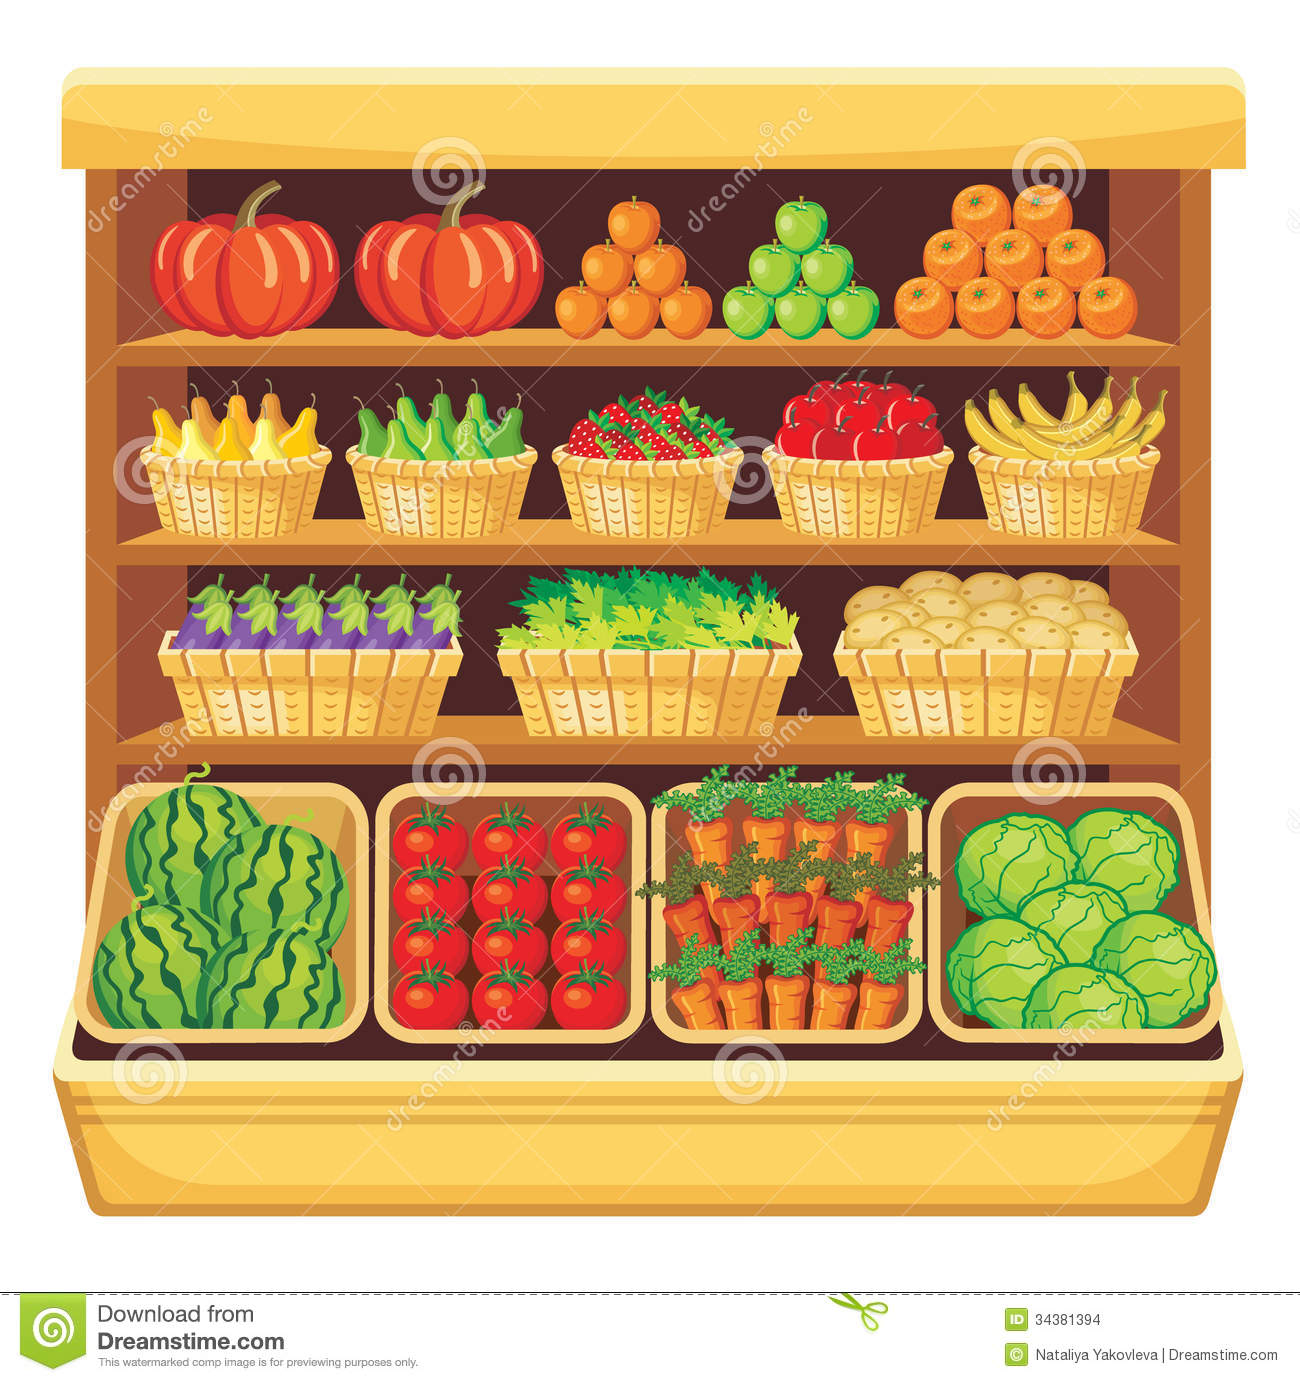 Displaying 18  Images For   Grocery Store Shelf Clipart   